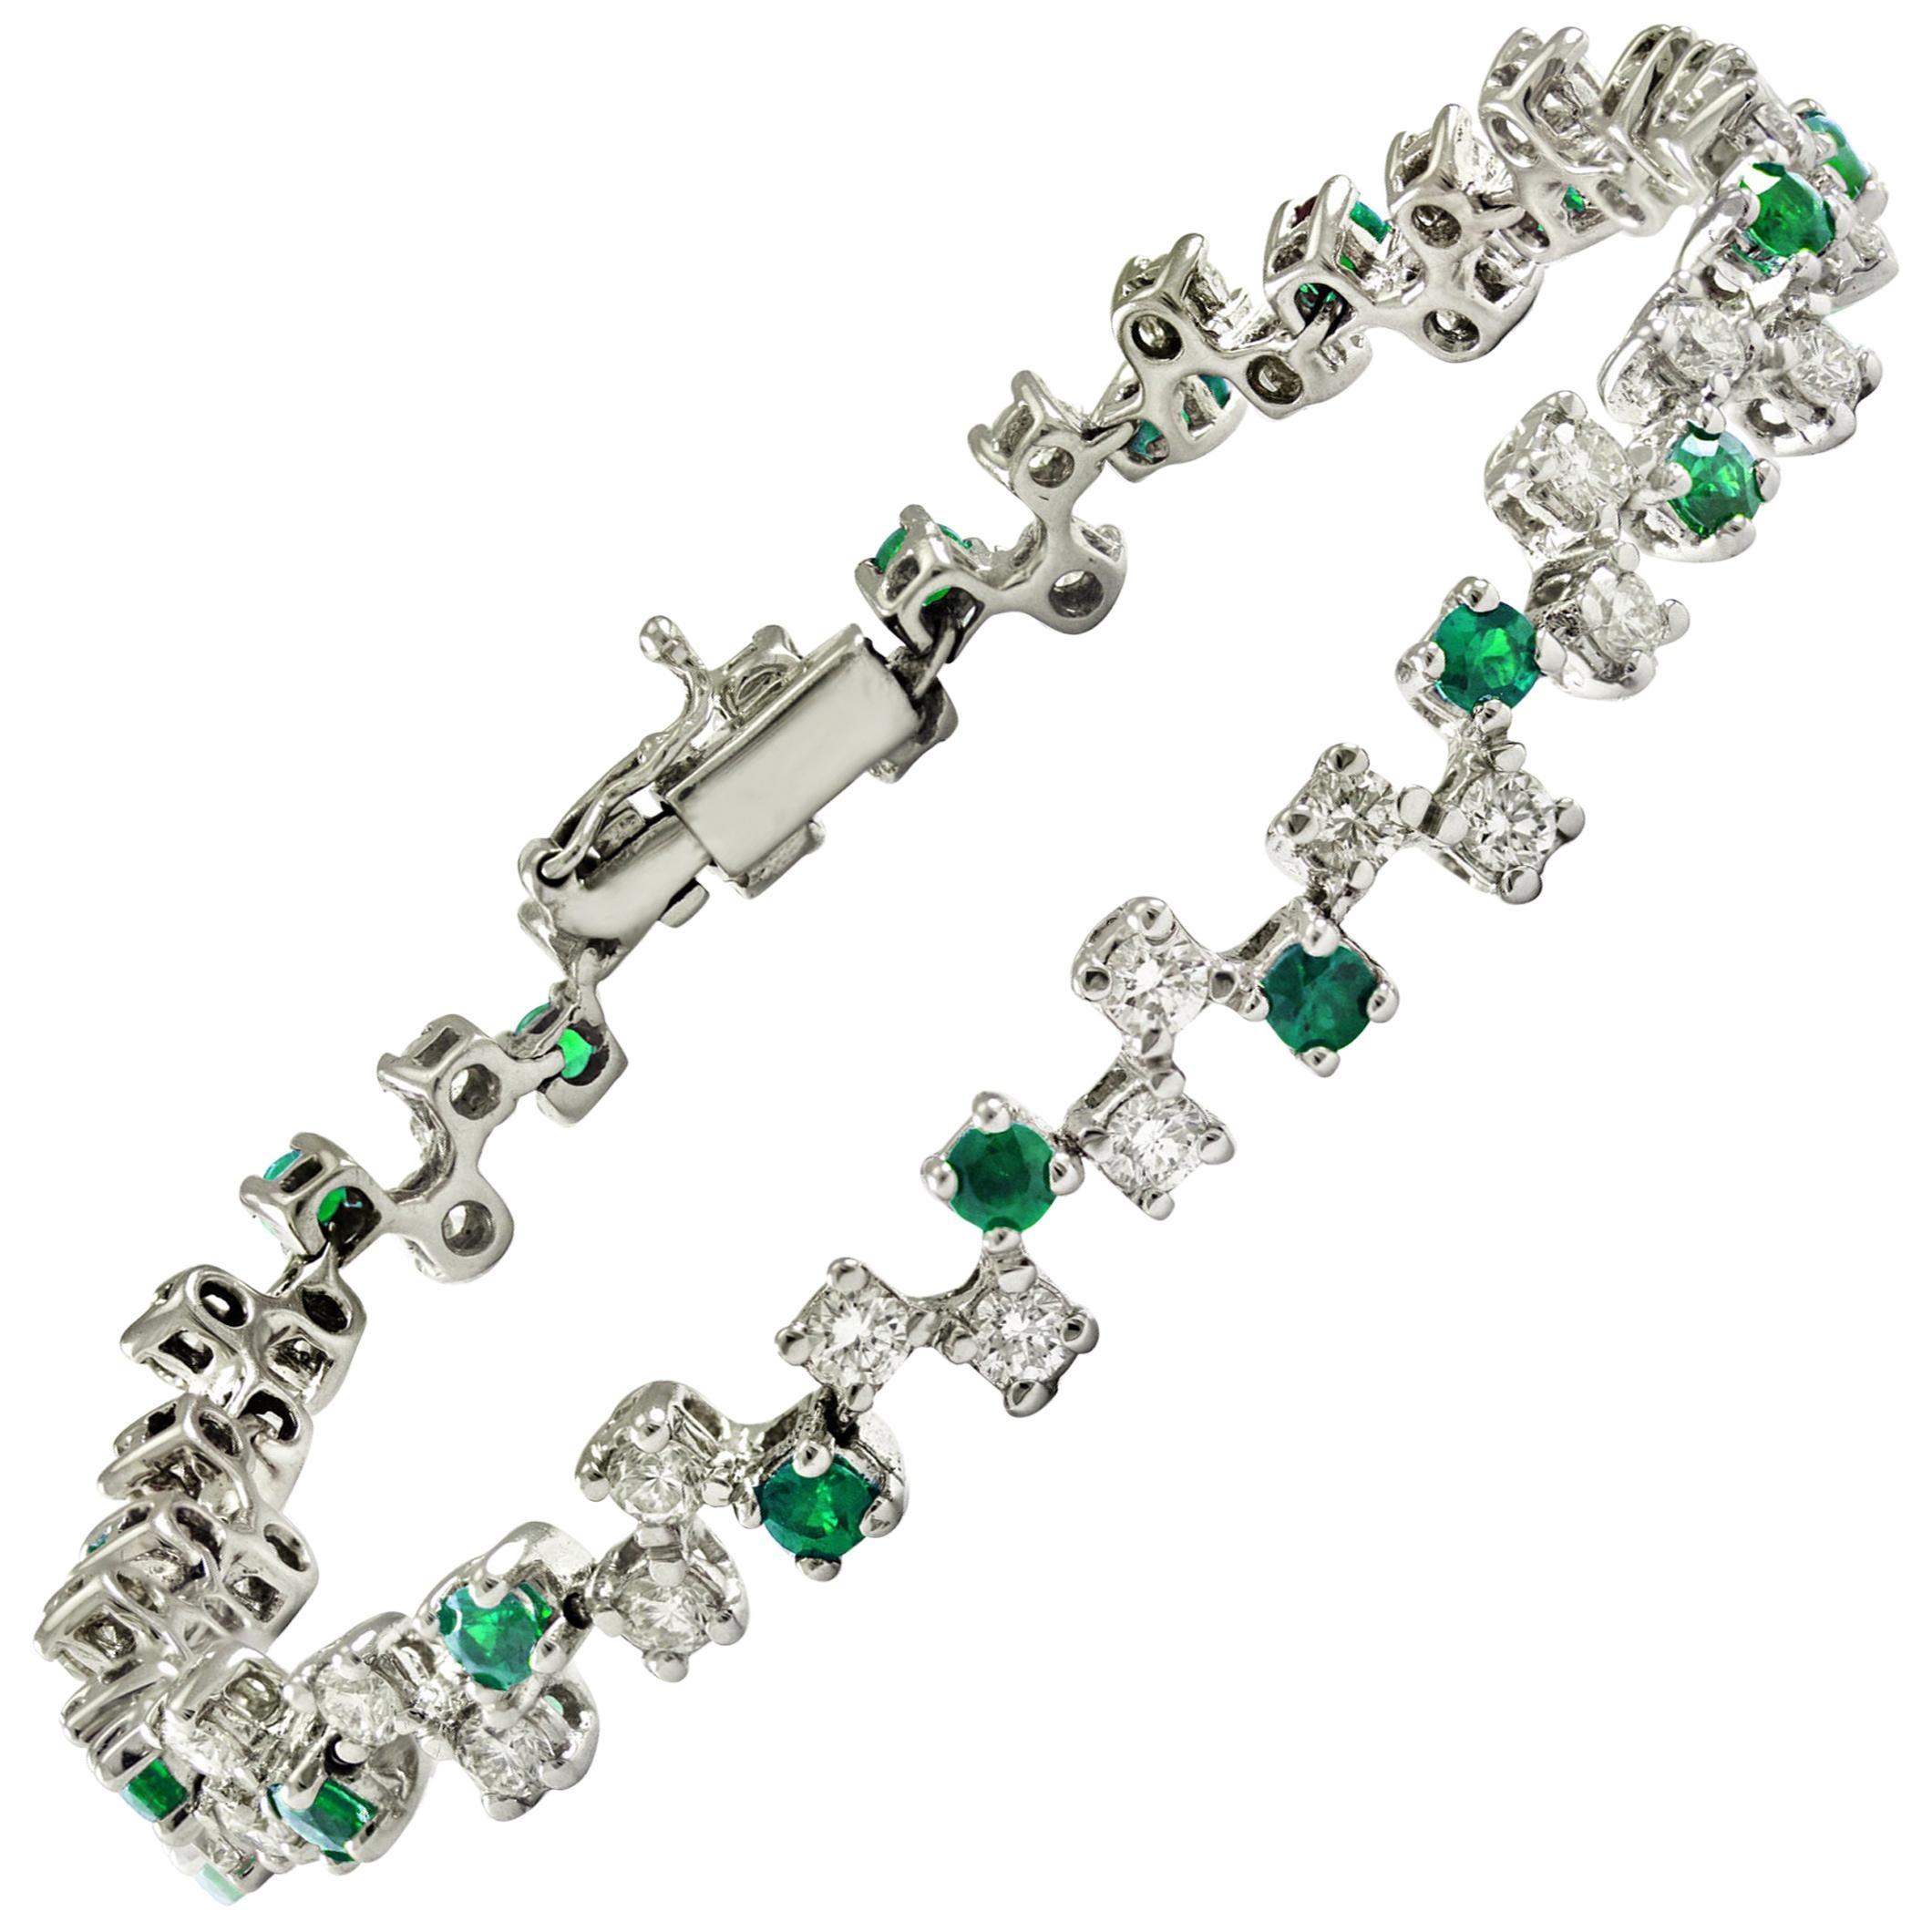 Emerald and White Diamond Tennis Bracelet Made to Measure in Italy